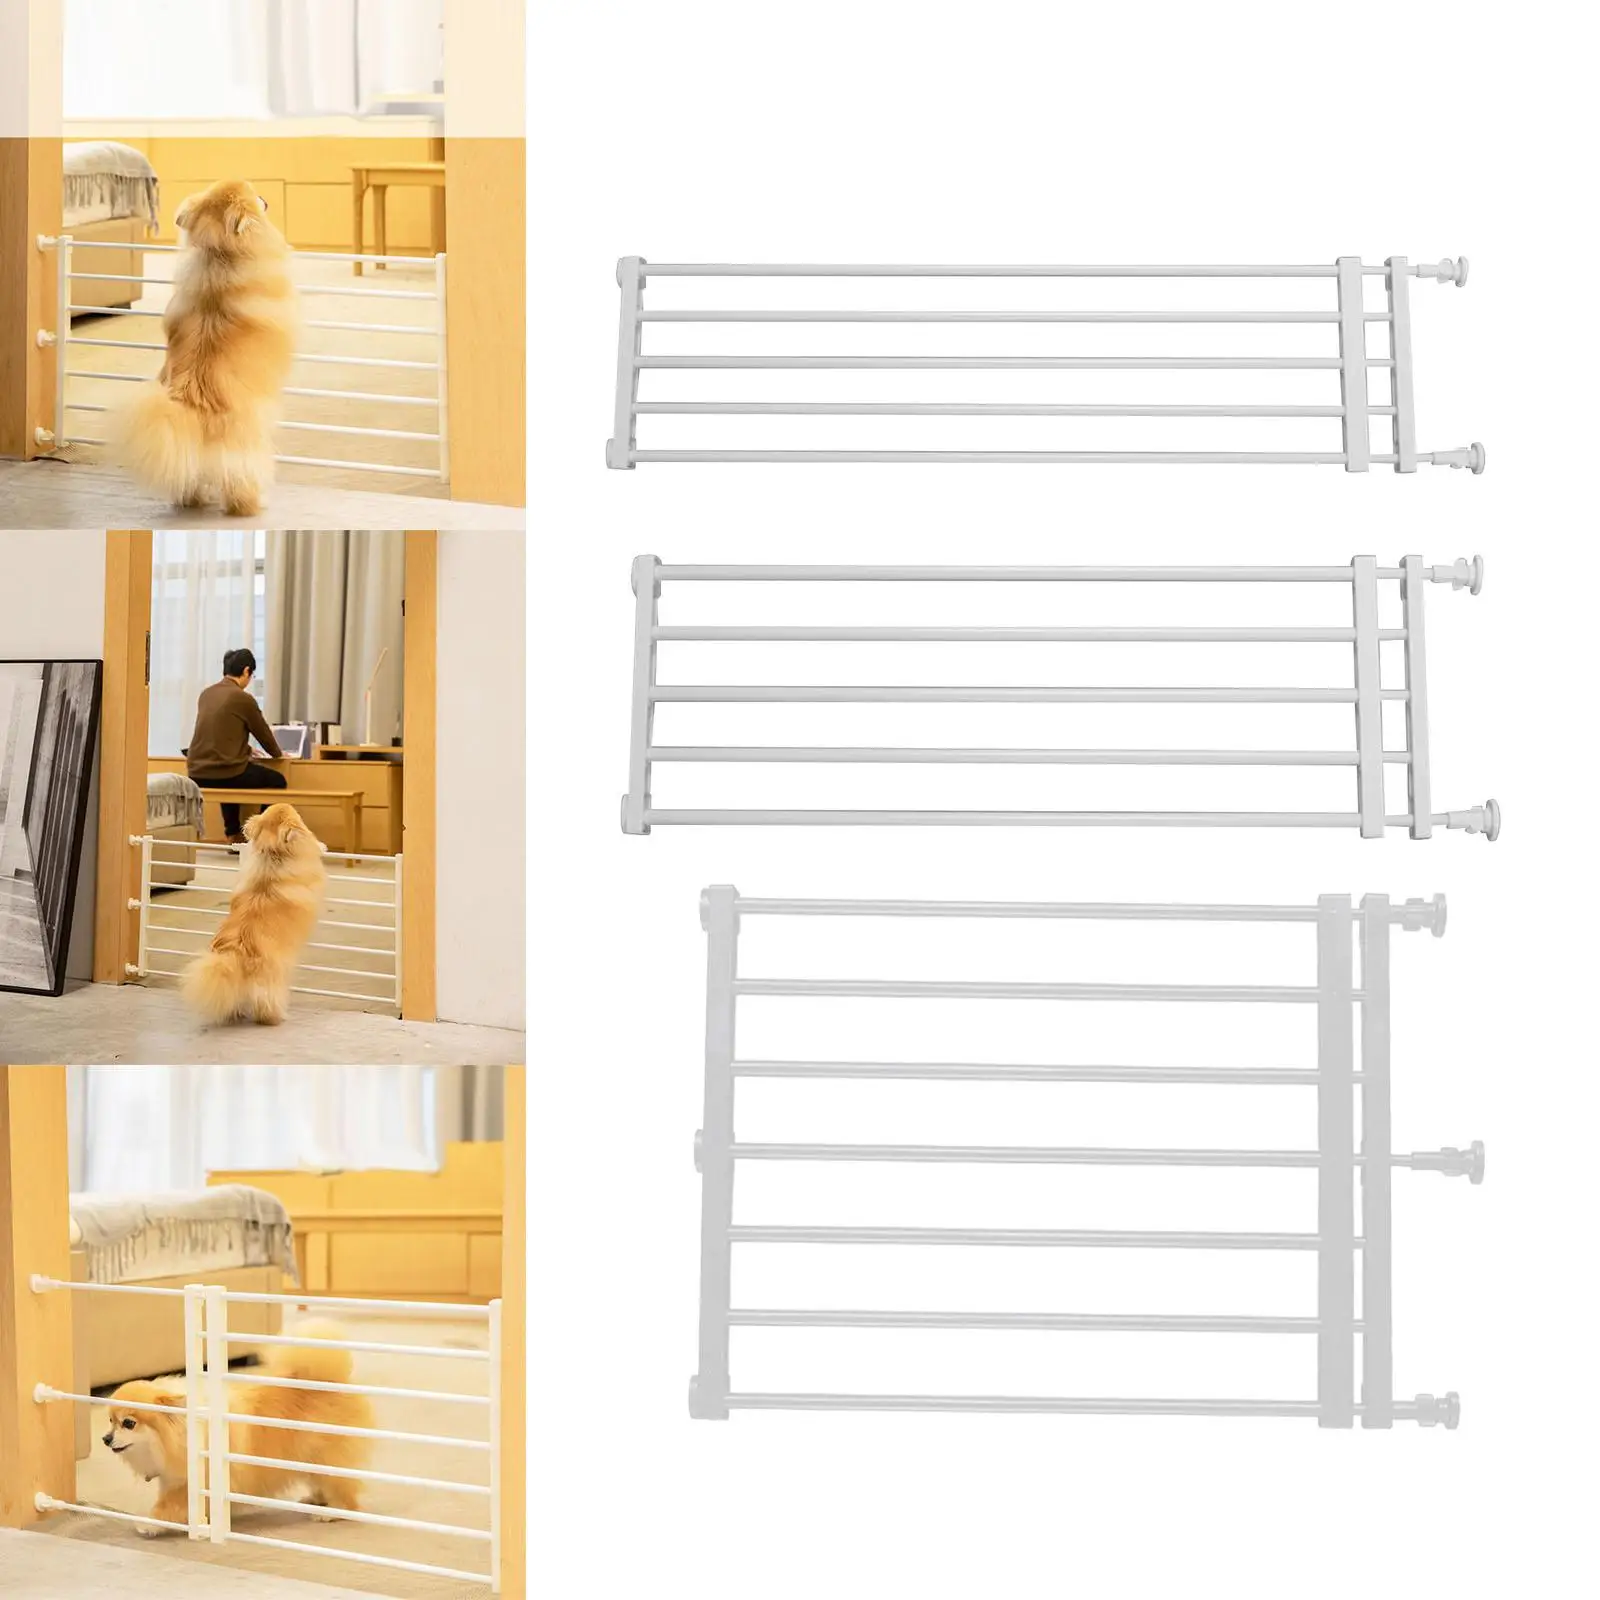 Portable Retractable Pet Dog Gate Child Barrier Screen Door Baby Fence Stair Gate for Small Medium Pet Cat Outdoor Indoor Stairs